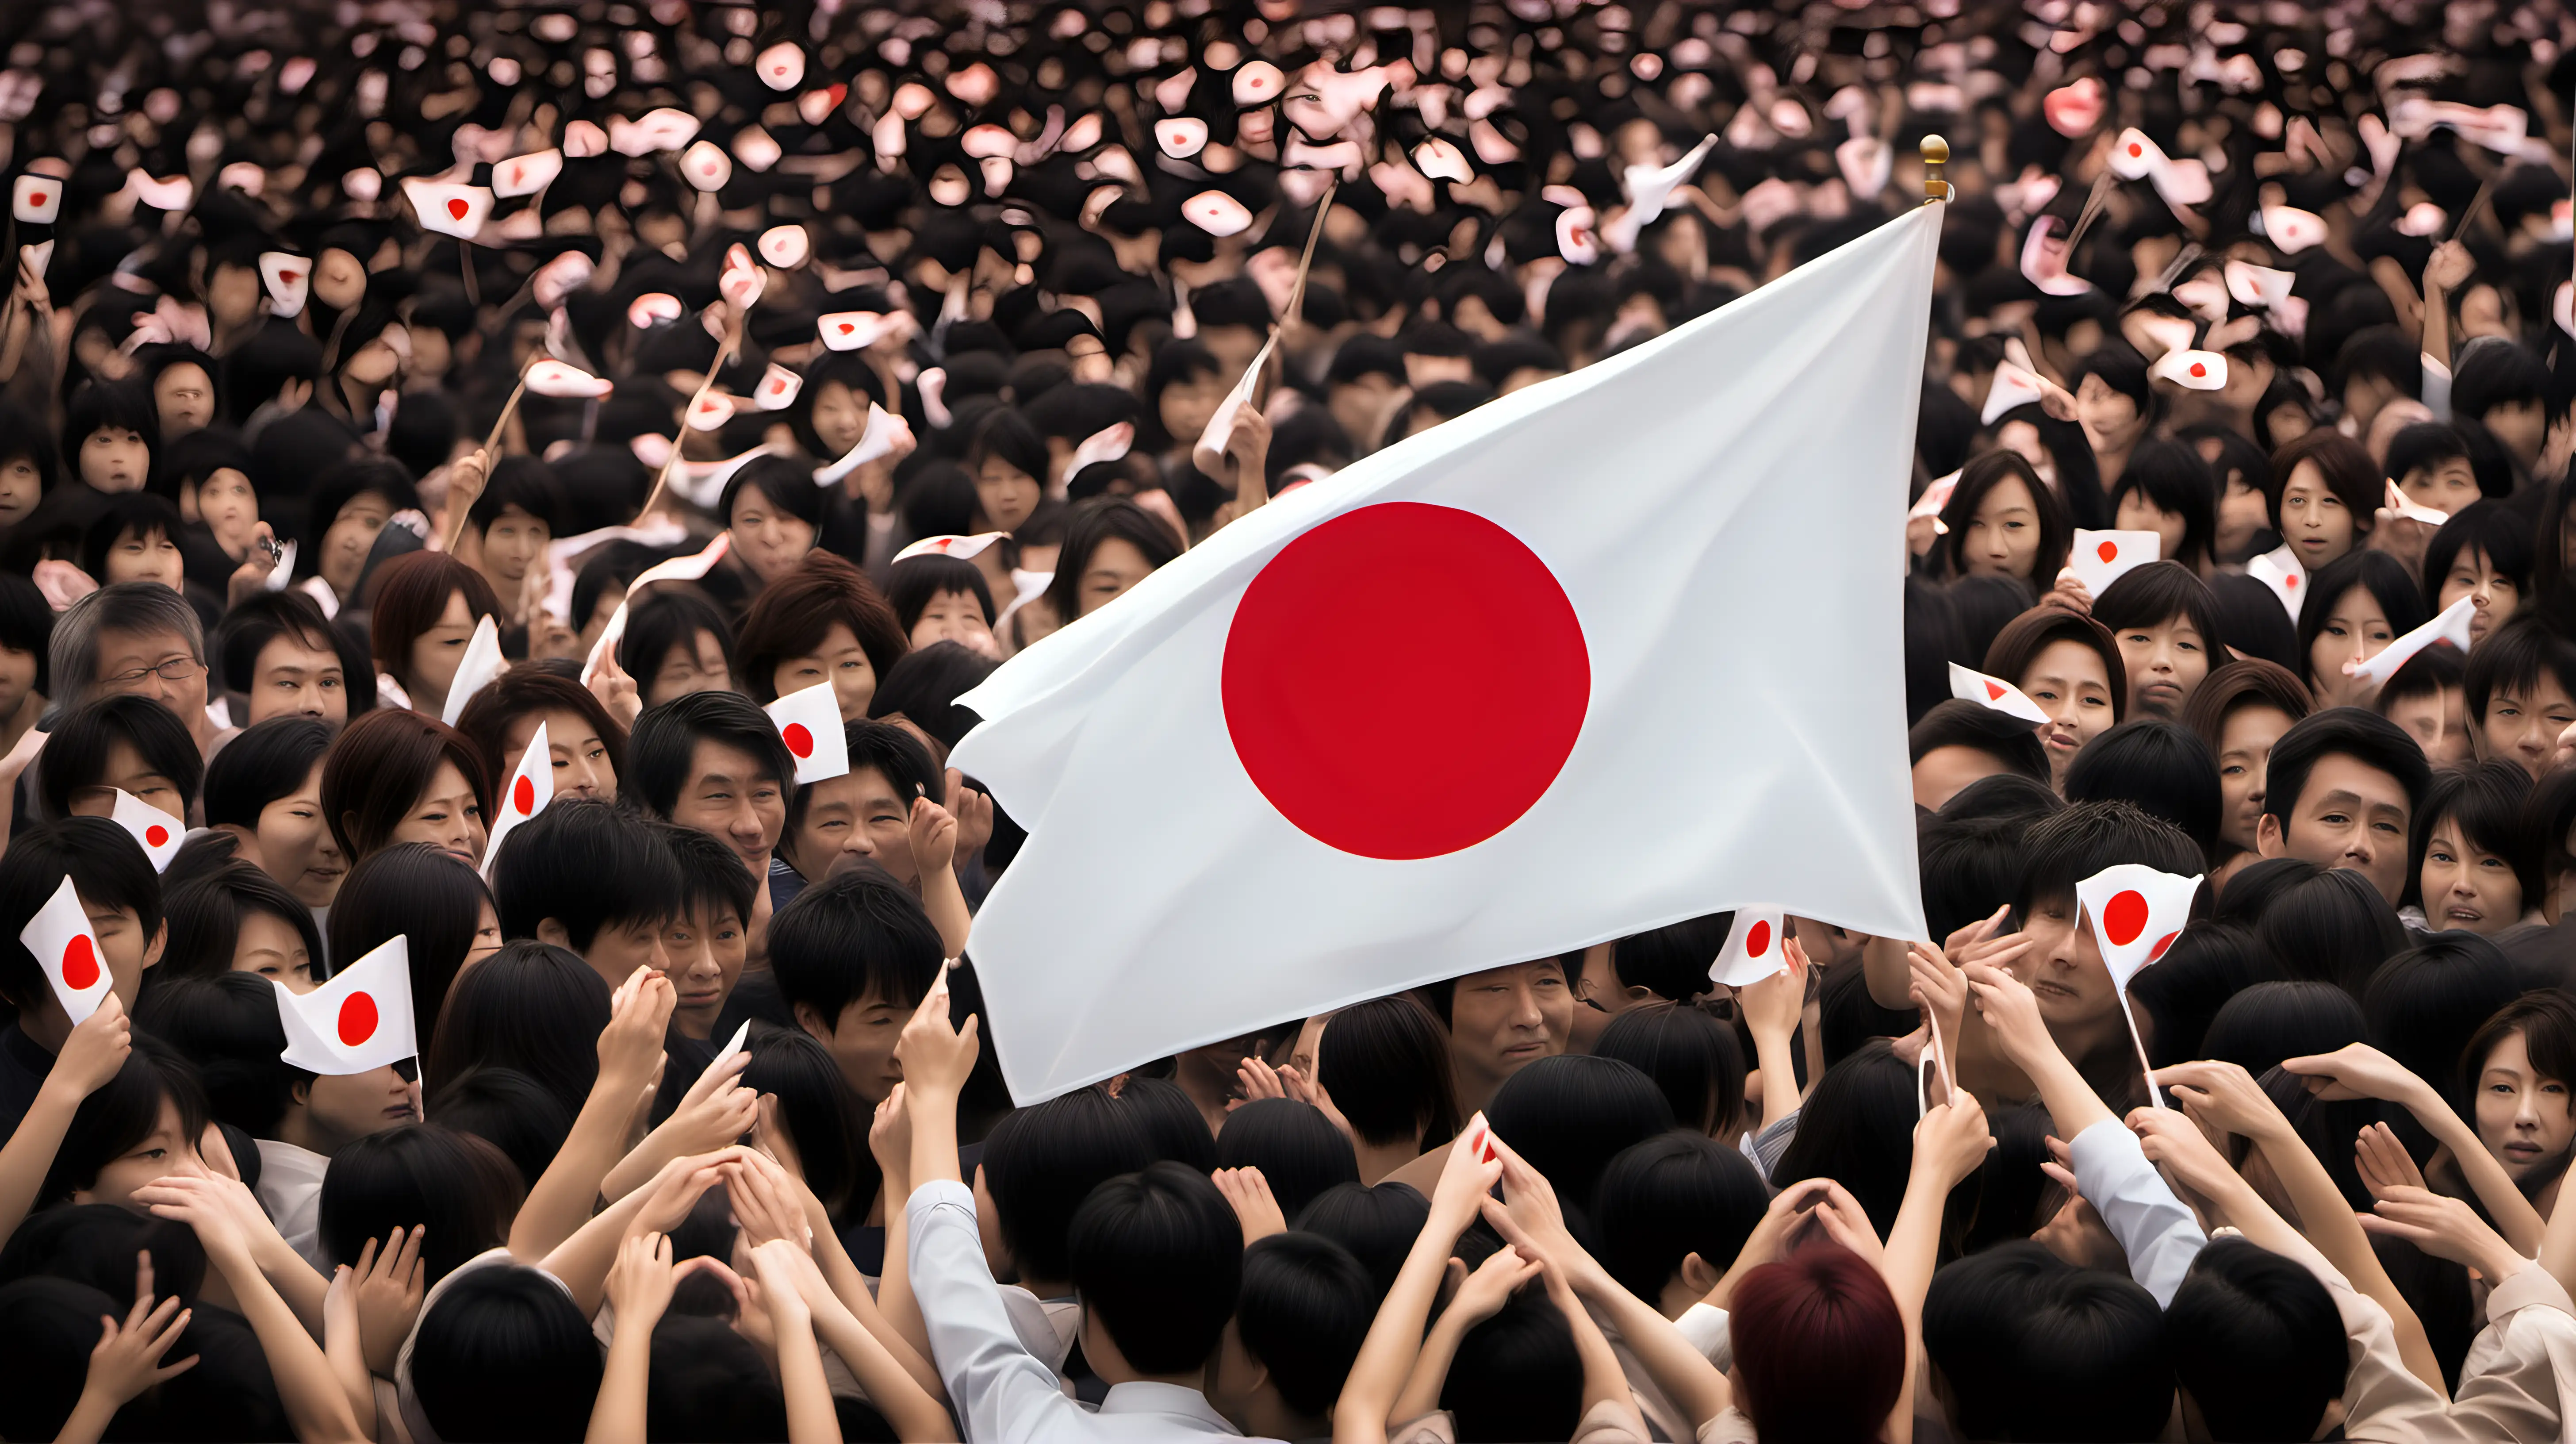 Patriotic Japanese Citizen Holding Flag at National Event